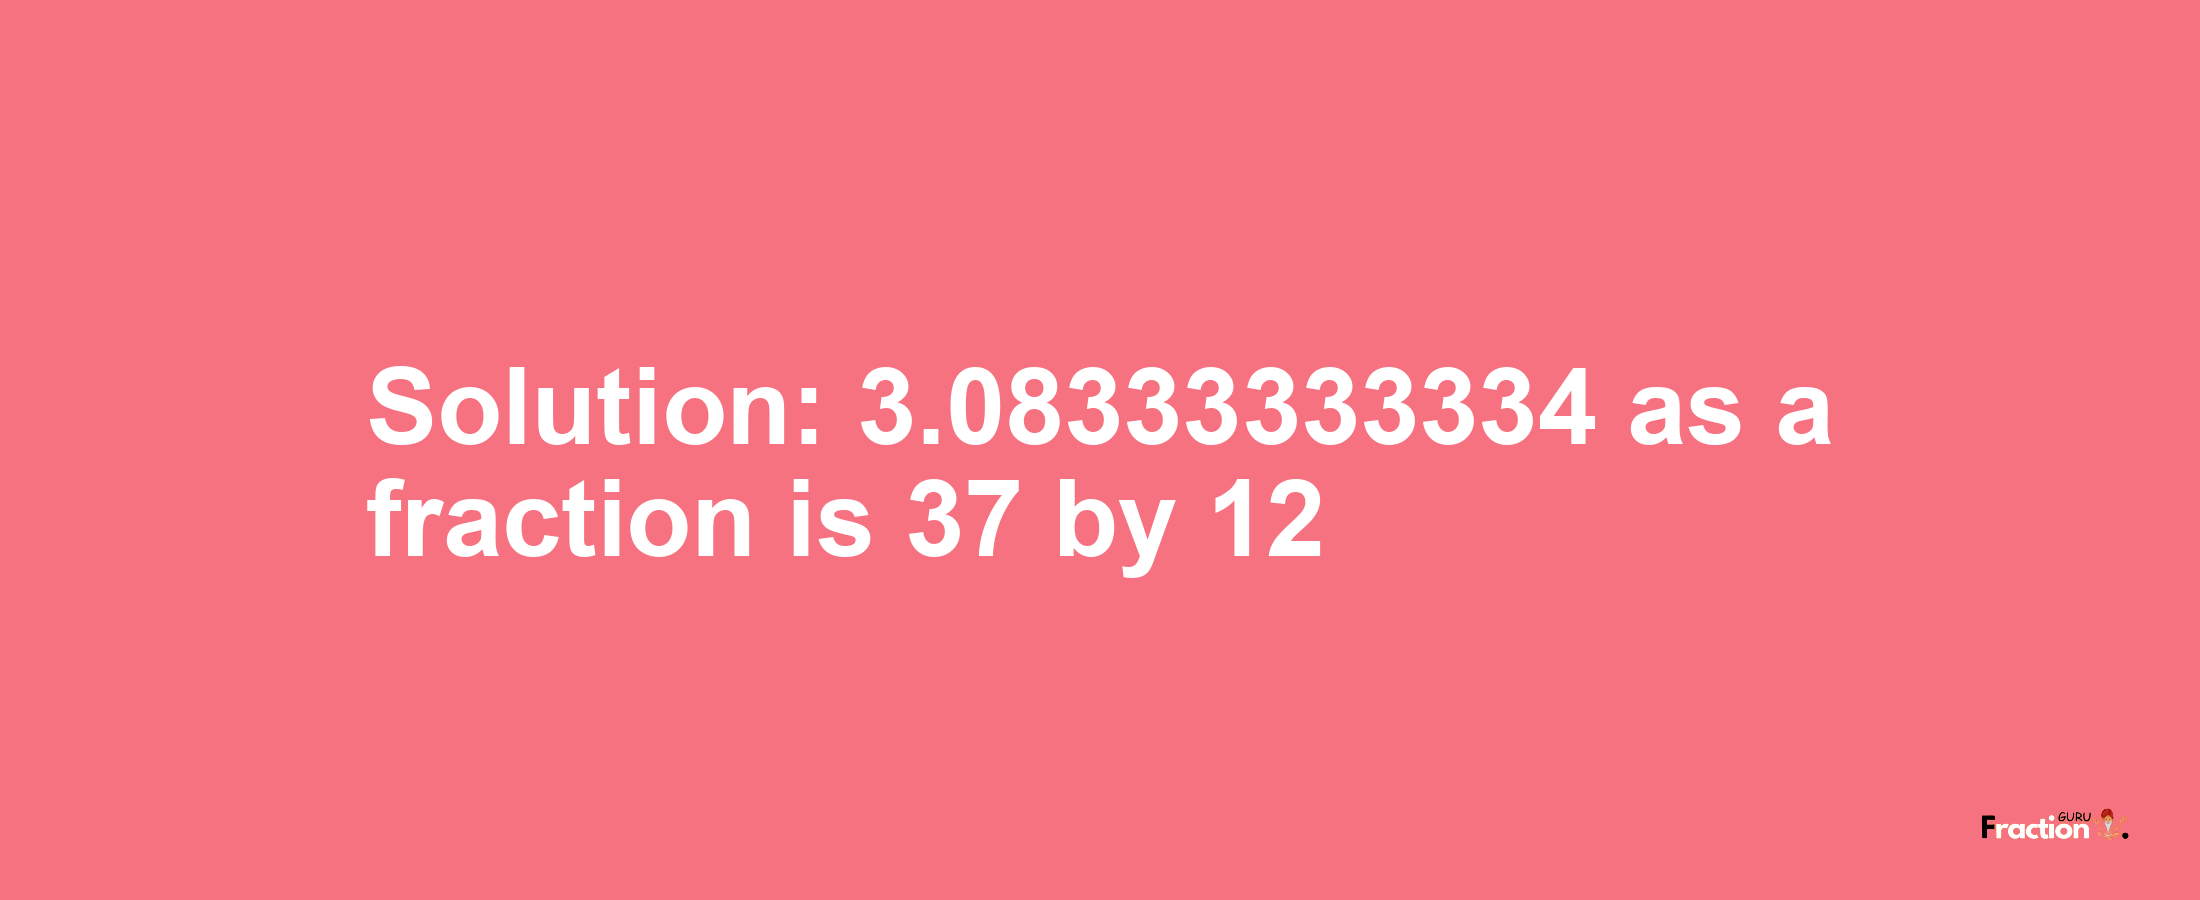 Solution:3.08333333334 as a fraction is 37/12